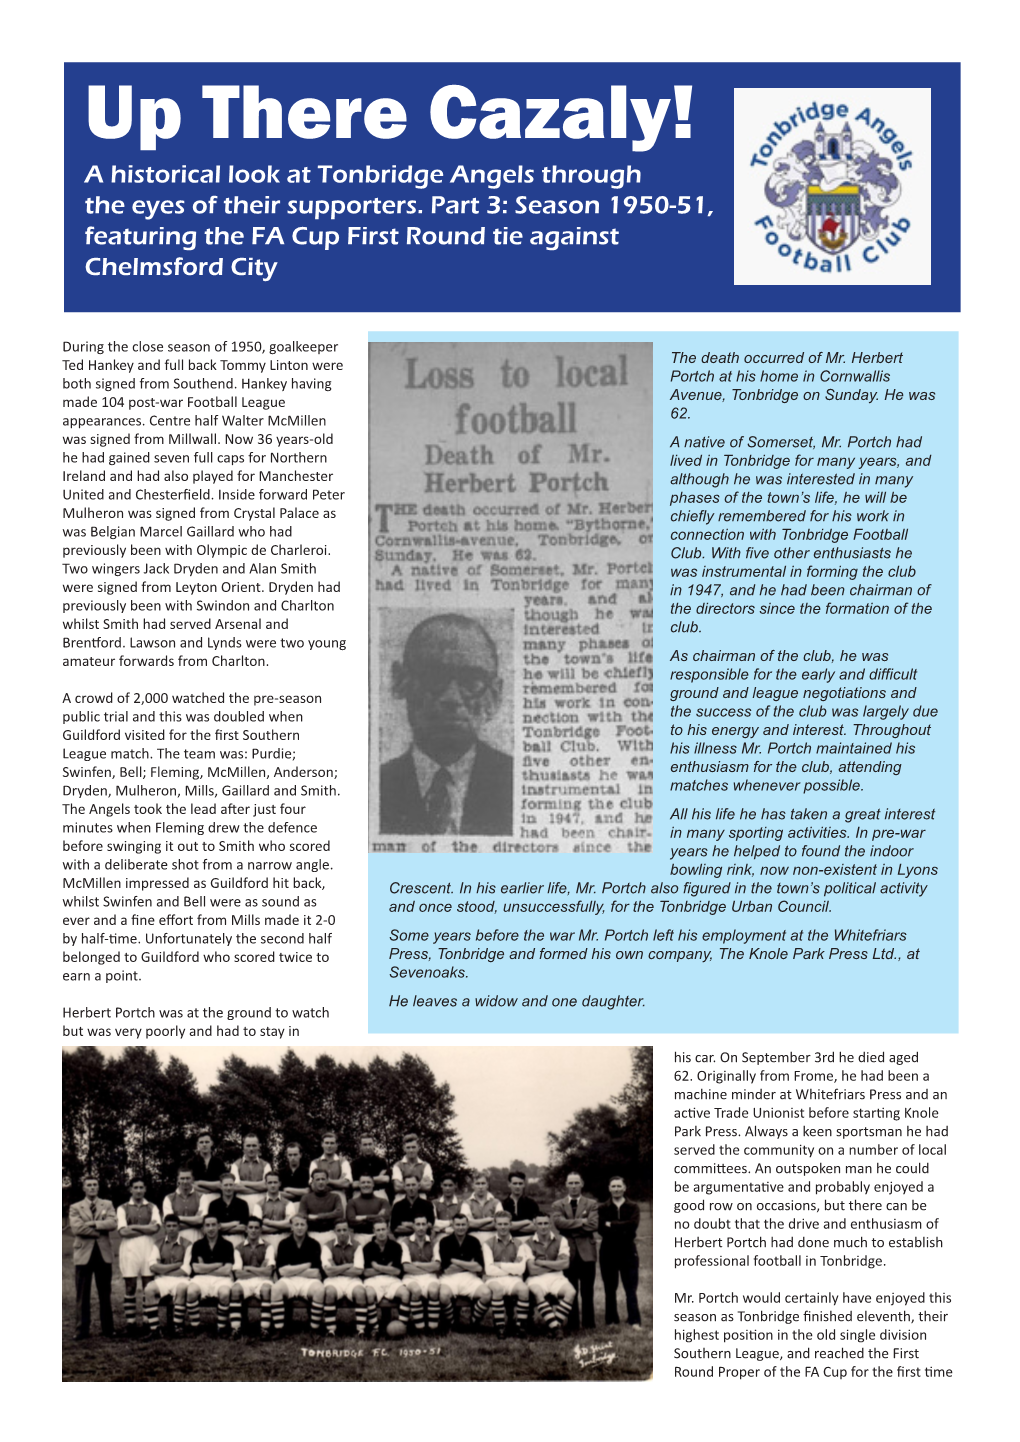 Up There Cazaly! a Historical Look at Tonbridge Angels Through the Eyes of Their Supporters